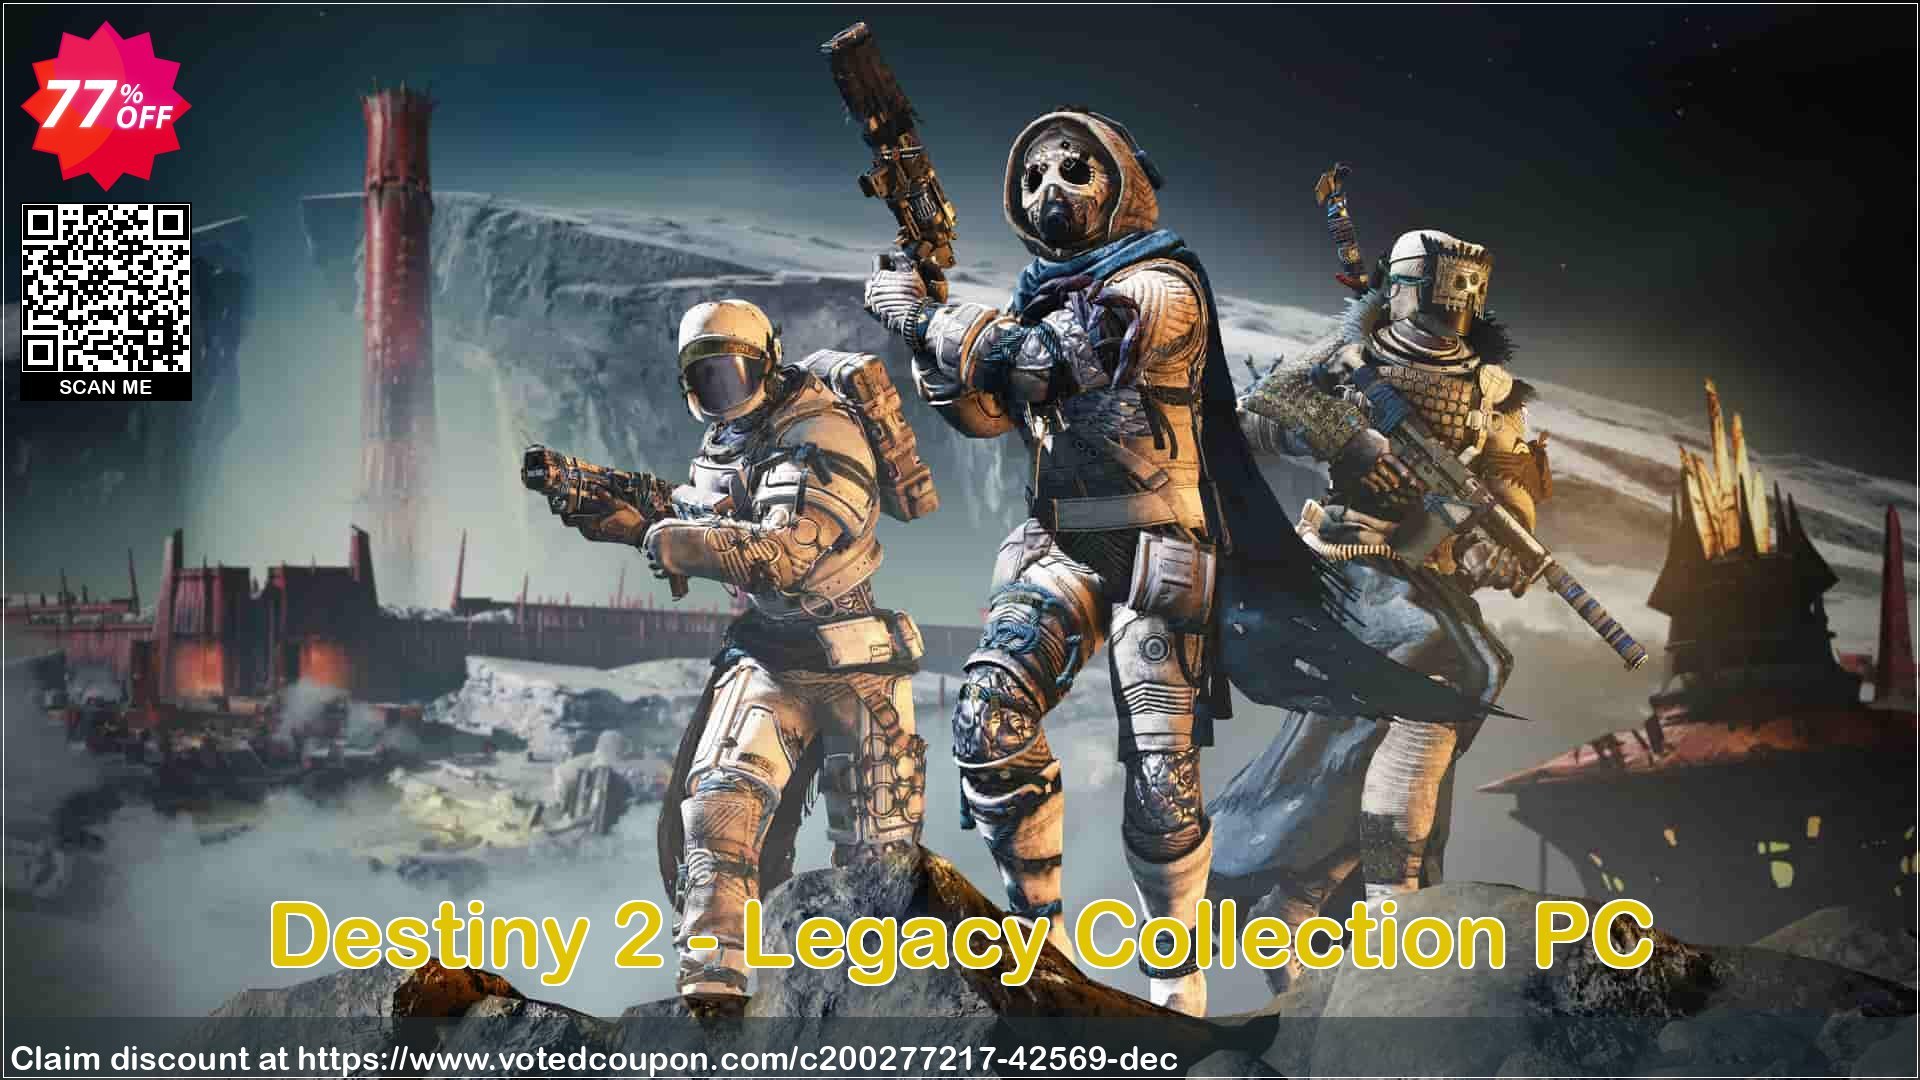 Destiny 2 - Legacy Collection PC Coupon Code May 2024, 77% OFF - VotedCoupon